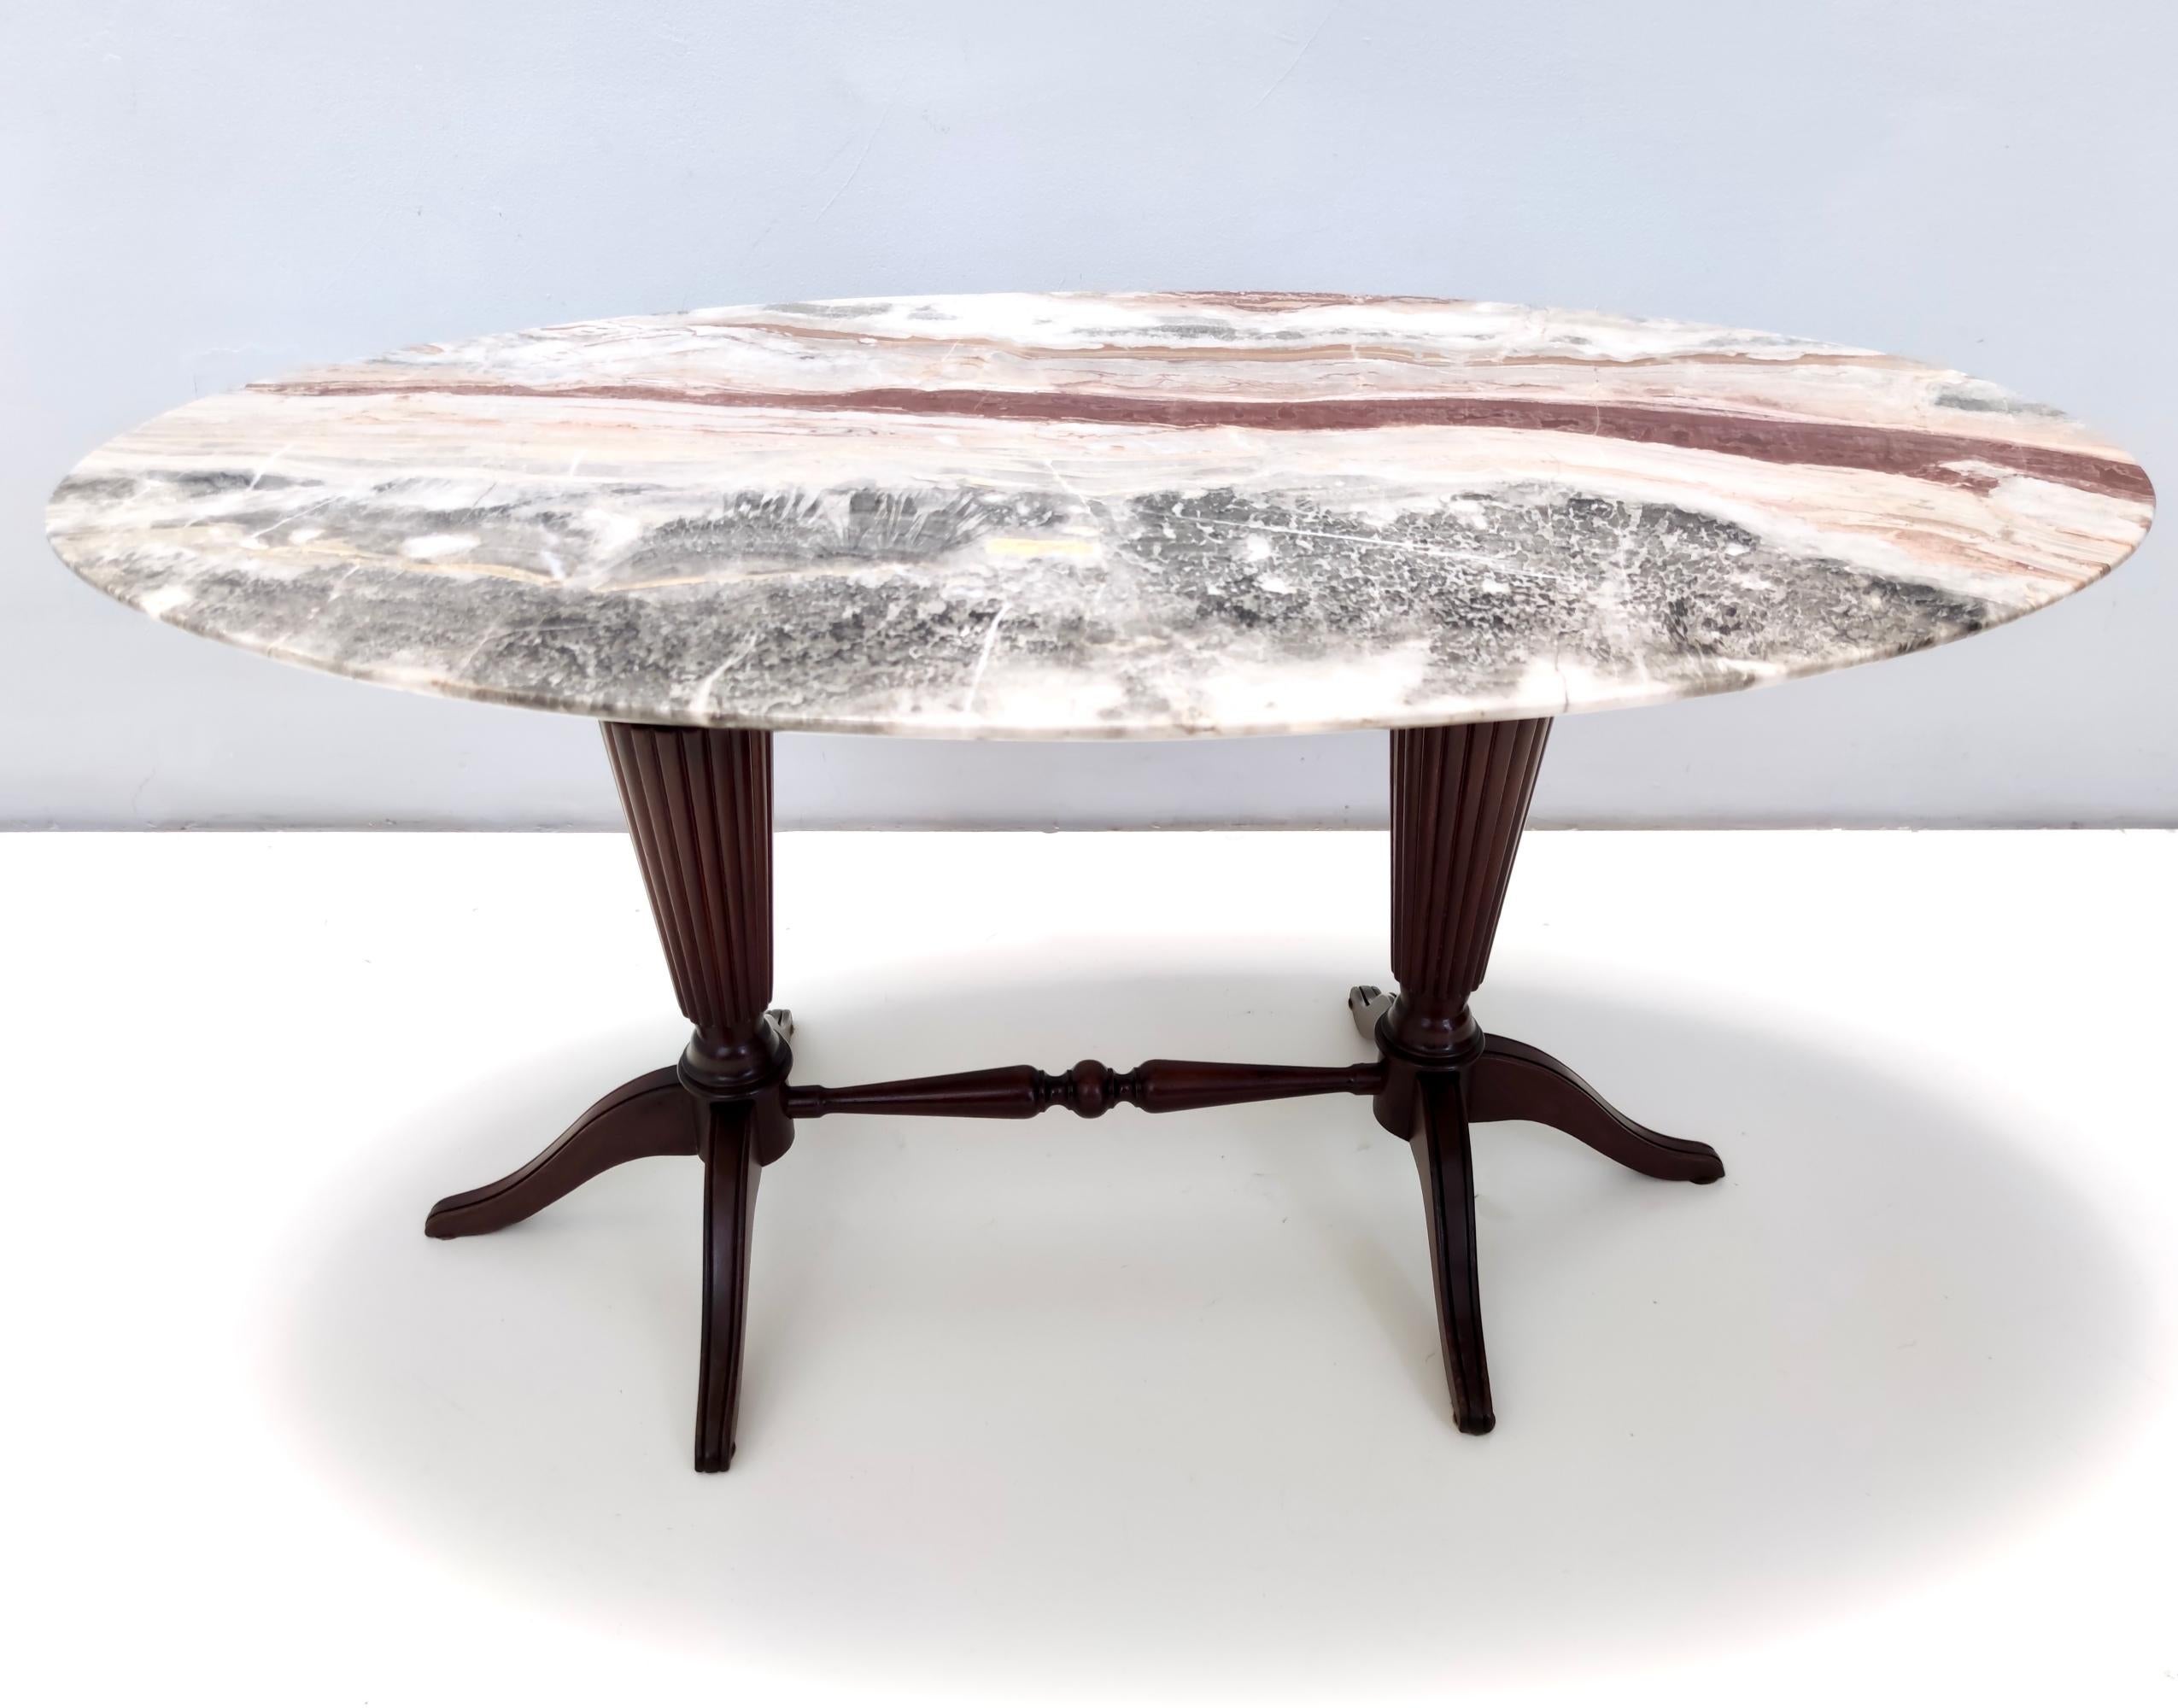 Polished Vintage Beech Coffee Table Ascribable to Paolo Buffa with an Oval Red Onyx Top For Sale